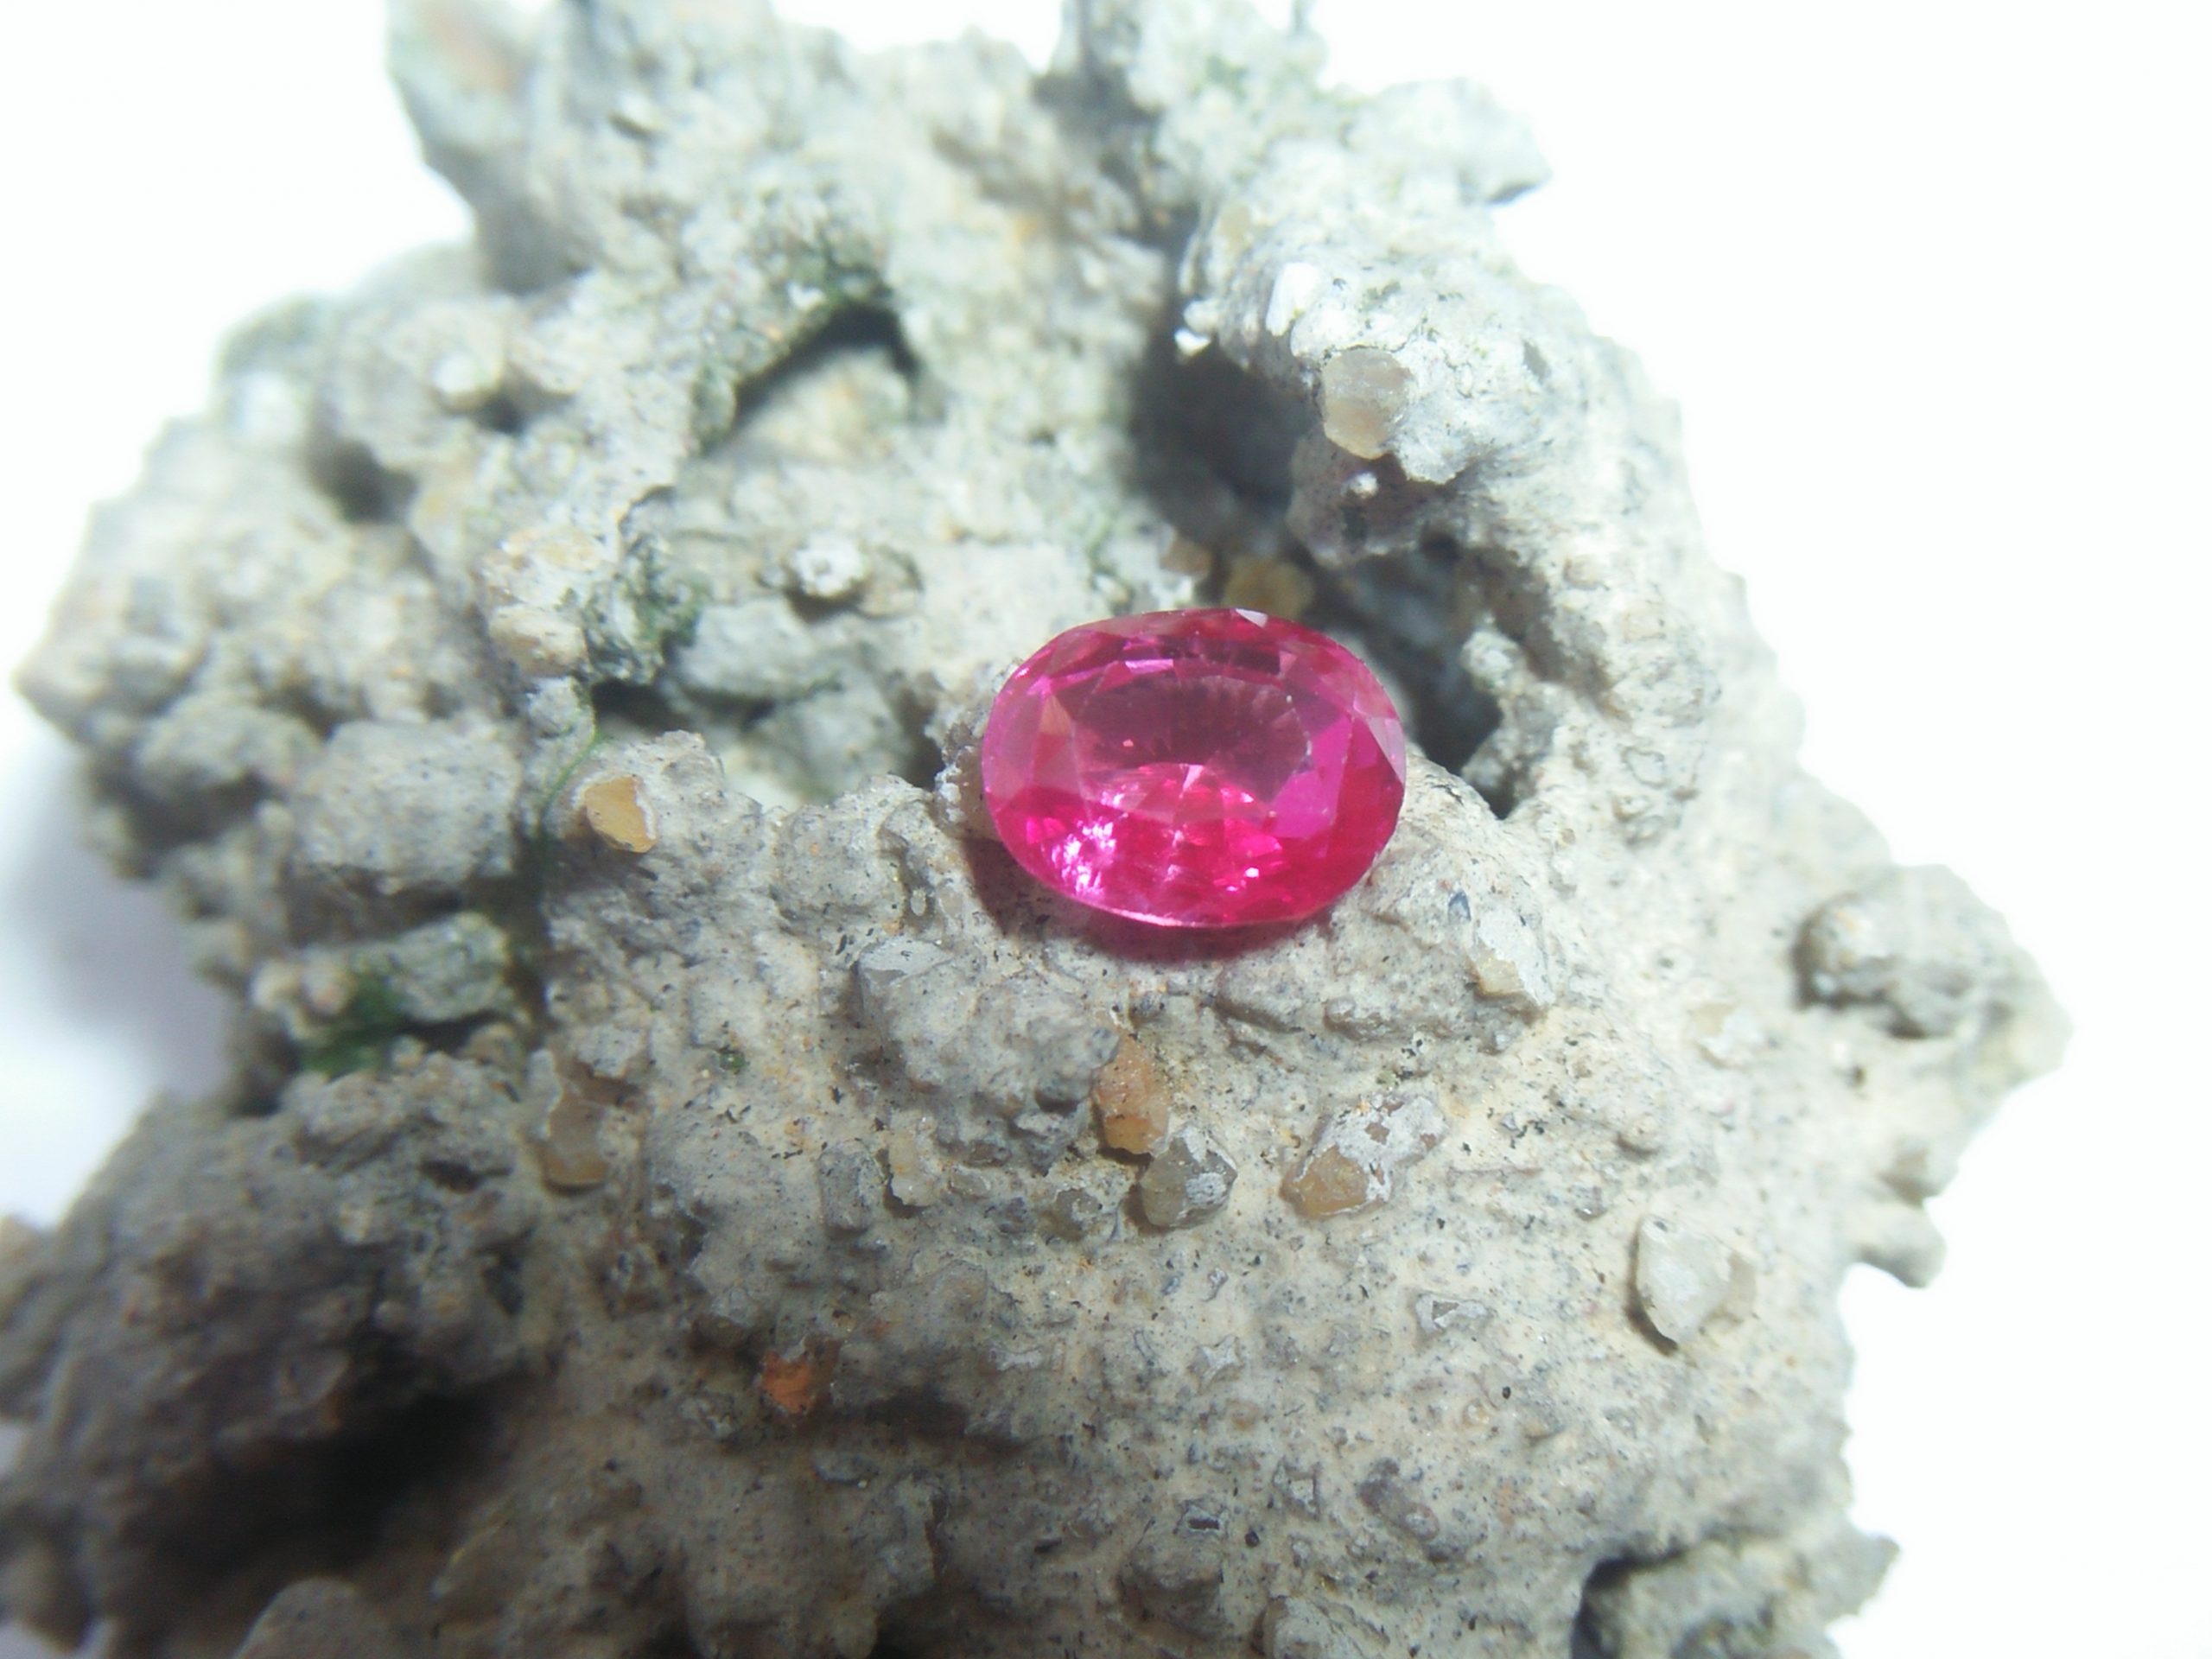 Ceylon NATURAL Pink Sapphire Colour : Hot Pink Shape : Oval Weight : 0.92 Dimension : 6.1 mm x 4.8mm x 3.4 mm Treatment : Heated Clarity : SI • CSL - Colored Stone Laboratory Certified ( GIA Alumni Association Member ) • CSL Memo No : 35E7D3E87864 Sapphire is a precious gemstone, a variety of the mineral corundum, consisting of aluminum oxide with trace amounts of elements such as iron, titanium, chromium, copper, or magnesium. Sapphire deposits are found in Eastern Australia, Thailand, Sri Lanka, China, Vietnam, Madagascar, Greenland, East Africa, and in North America in mostly in Montana. Madagascar, Sri Lanka, and Kashmir produce large quantities of fine quality Sapphires for the world market. Sapphires are mined from alluvial deposits or from primary underground workings. Blue Sapphire and Ruby are the most popular Gemstone in Corundum Family. also, Orangy Pink Sapphire is called Padparadscha. The name Drive's from the Sinhalese word "padmaraga" " පද්මරාග", meaning lotus blossom, as the stone is of a similar color to the lotus blossom. Bi-Color Sapphire from DanuGroup Collection Also, Sapphire can be found as parti-color, bi-color or fancy color. Australia is a main parti-color Sapphire producer. White Sapphire also, White sapphire is a very popular stone to wear instead of Diamond as a 3rd hardness gemstone after diamond ( moissanite hardness is 9.5). Various colors of star sapphires A star sapphire is a type of sapphire that exhibits a star-like phenomenon known as asterism. Also, A rare variety of natural sapphire, known as color-change sapphire, exhibits different colors in a different light. Sapphires can be treated by several methods to enhance and improve their clarity and color. A common method is done by heating the sapphires in furnaces to temperatures between 500 and 1,850 °C for several hours, or by heating in a nitrogen-deficient atmosphere oven for 1 week or more. Geuda is a form of the mineral corundum. Geuda is found primarily in Sri Lanka. It's a semitransparent and milky appearance due to rutile inclusions. Geuda is used to improve its color by heat treatment. Some geuda varieties turn to a blue color after heat treatments and some turn to red after oxidizing. Also, Kowangu pushparaga turns to yellow sapphire after oxidizing. Sapphire Crystal system is a Trigonal crystal system with a hexagonal scalenohedral crystal class. Sapphire hardness is 9 according to the Mohs hardness scale with 4.0~4.1 specific gravity. Refractive index ω          =1.768–1.772 nε =1.760–1.763 Solubility = Insoluble Melting point = 2,030–2,050 °C Birefringence  = 0.008 Pleochroism = Strong Luster = Vitreous Sapphire is the birthstone for September and the gem of the 45th anniversary. Healing Properties of Sapphire Sapphire releases mental tension, depression, unwanted thoughts, and spiritual confusion.  Sapphire is known as a "stone of Wisdom". It is exceptional for calming and focusing the mind, allowing the release of mental tension and unwanted thoughts. Sapphire is also the best stone for awakening chakras. Dark Blue or Indigo Sapphire stimulates the Third Eye chakra. Blue Sapphire stimulates the Throat Chakra. Green sapphire stimulates Heart Chakra. Black Sapphire stimulates Base Chakra. White sapphire stimulates Crown Chakra. Yellow sapphire stimulates Solar Plexus Chakra. Pink Sapphire Healings It is believed that pink sapphires used for therapeutic purposes as crystals might nourish the emotional well-being of the person wearing the jewelry crafted from the gems. The theory behind these therapeutic beliefs centers on clearing emotional blockages from the past to release hurtful experiences. • Nourishing the Emotional Body with the PinkColor Ray • Energetic Columns of Support • Longevity and Extending the Lifespan of Your Cells • Astral Vision and Sensitivity to Energy